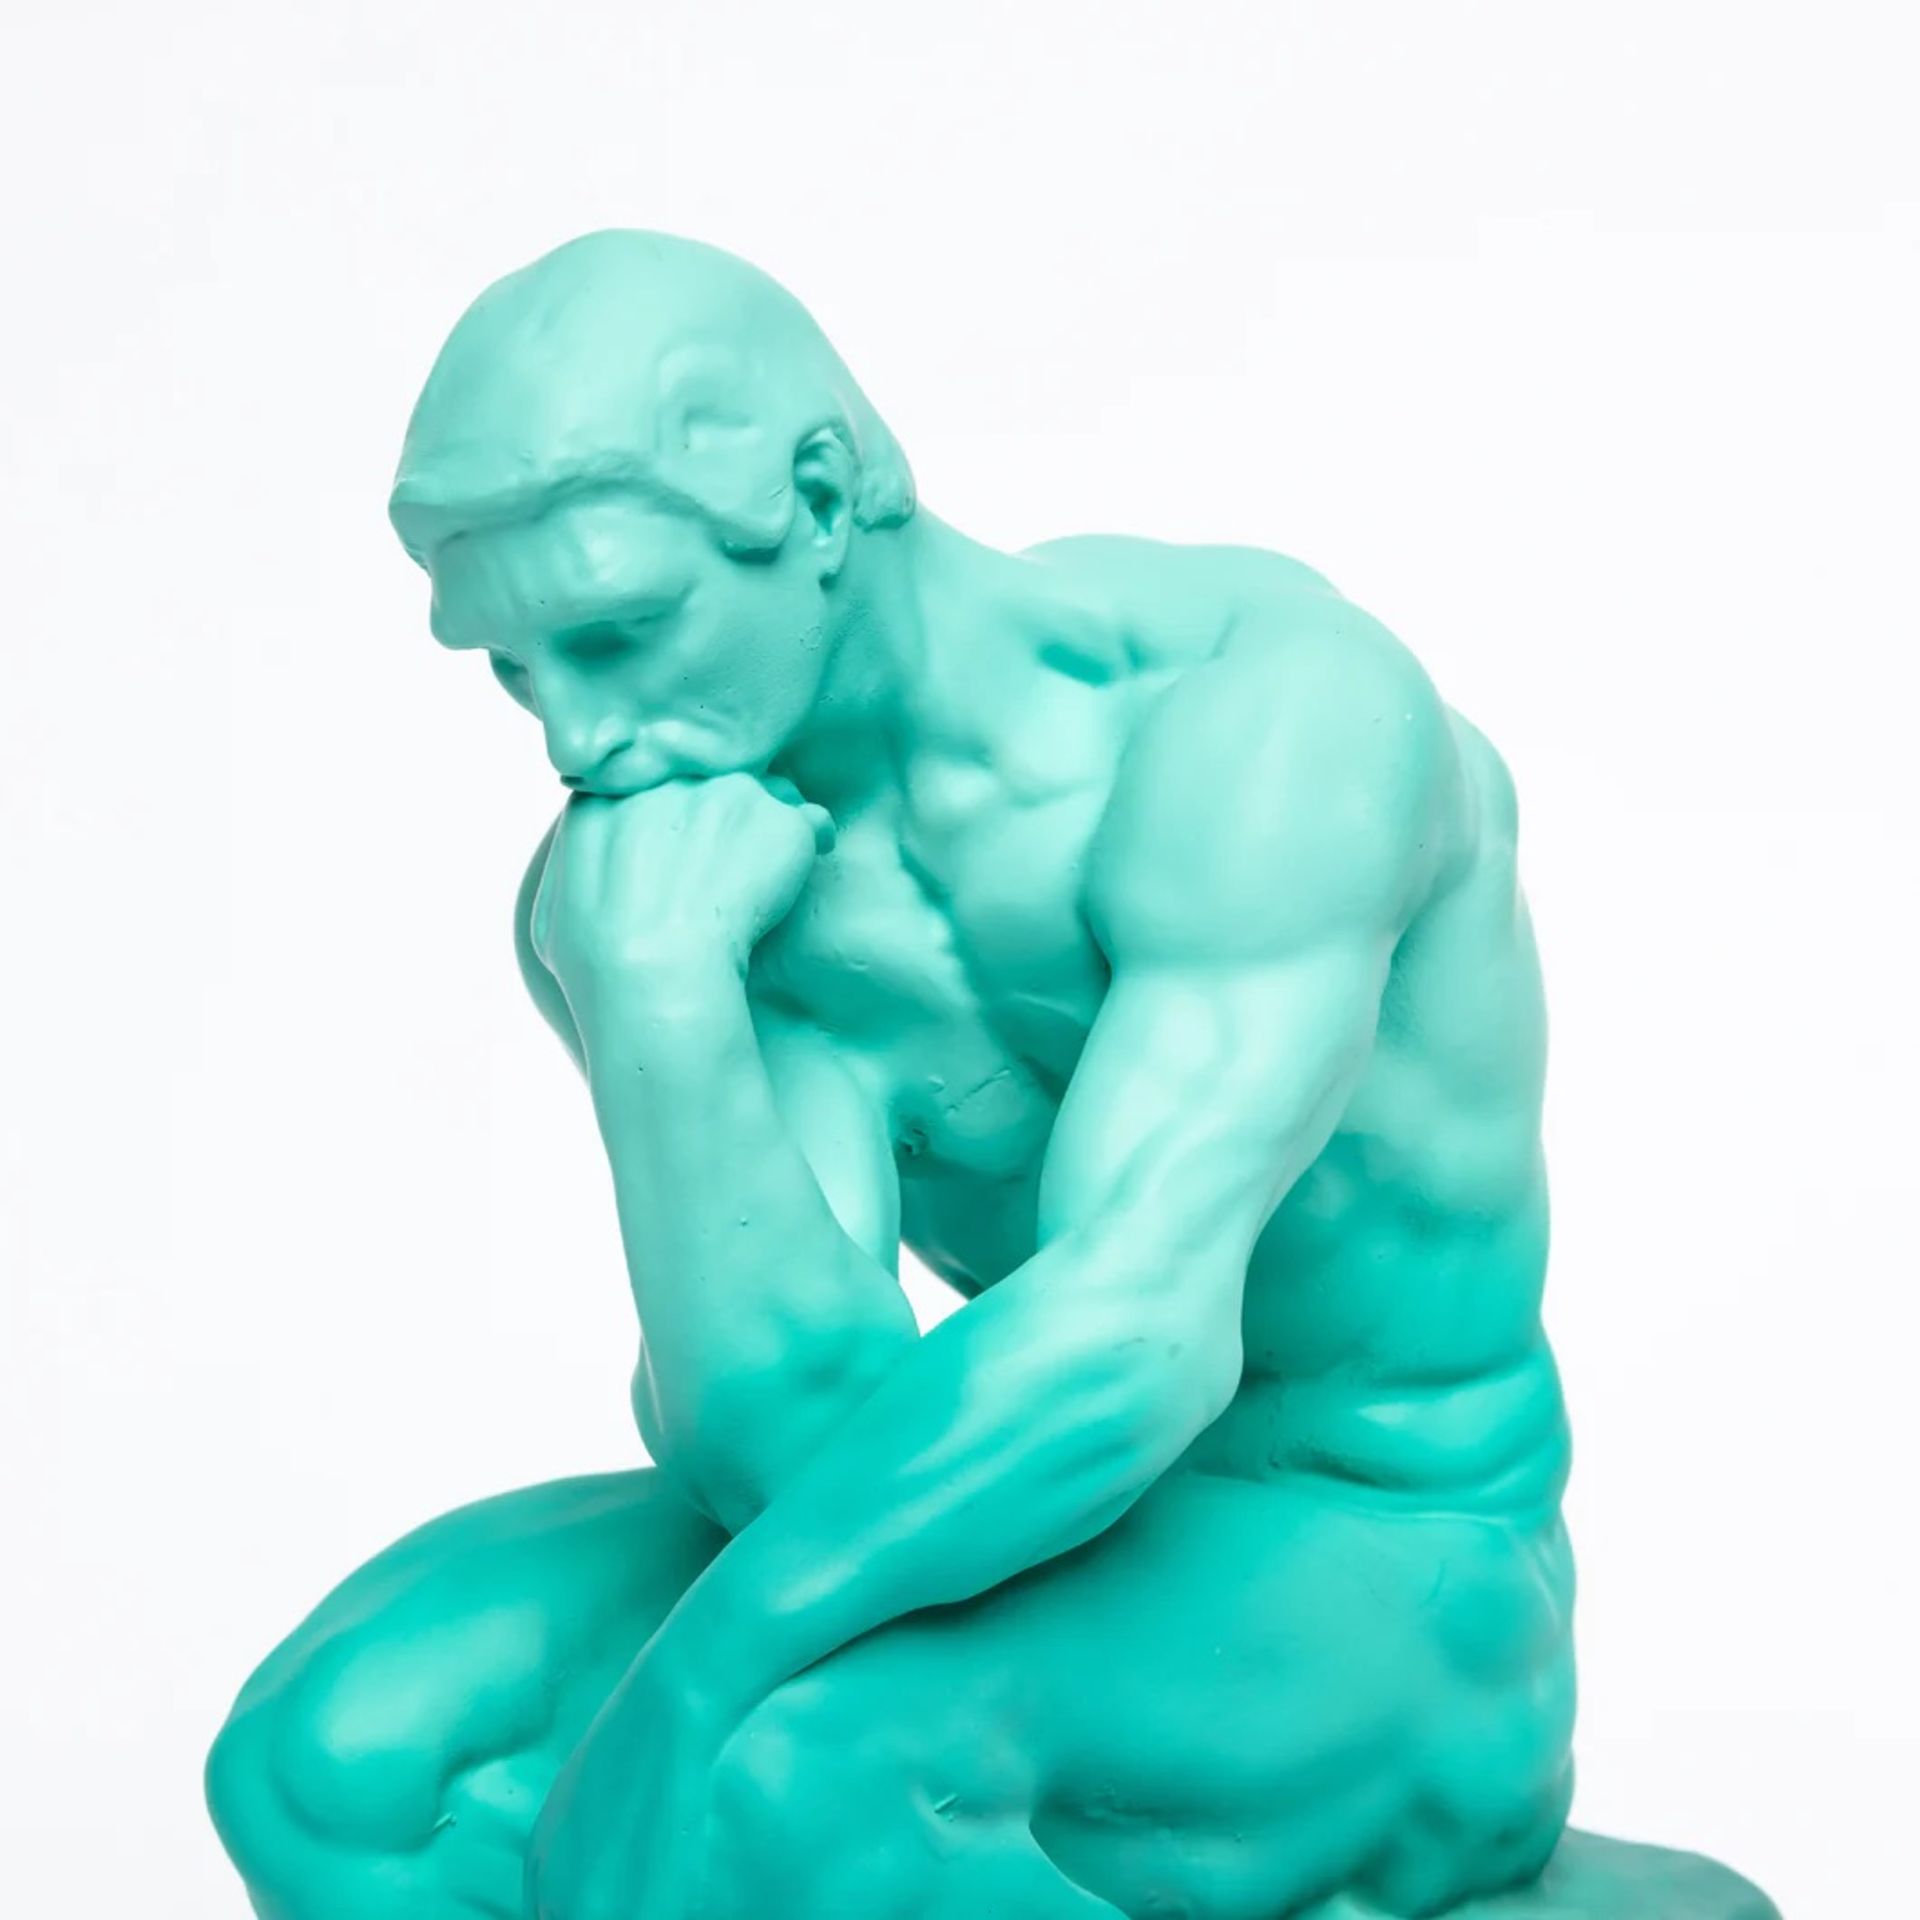 Auguste Rodin "The Thinker, 1904" Sculpture - Image 4 of 5